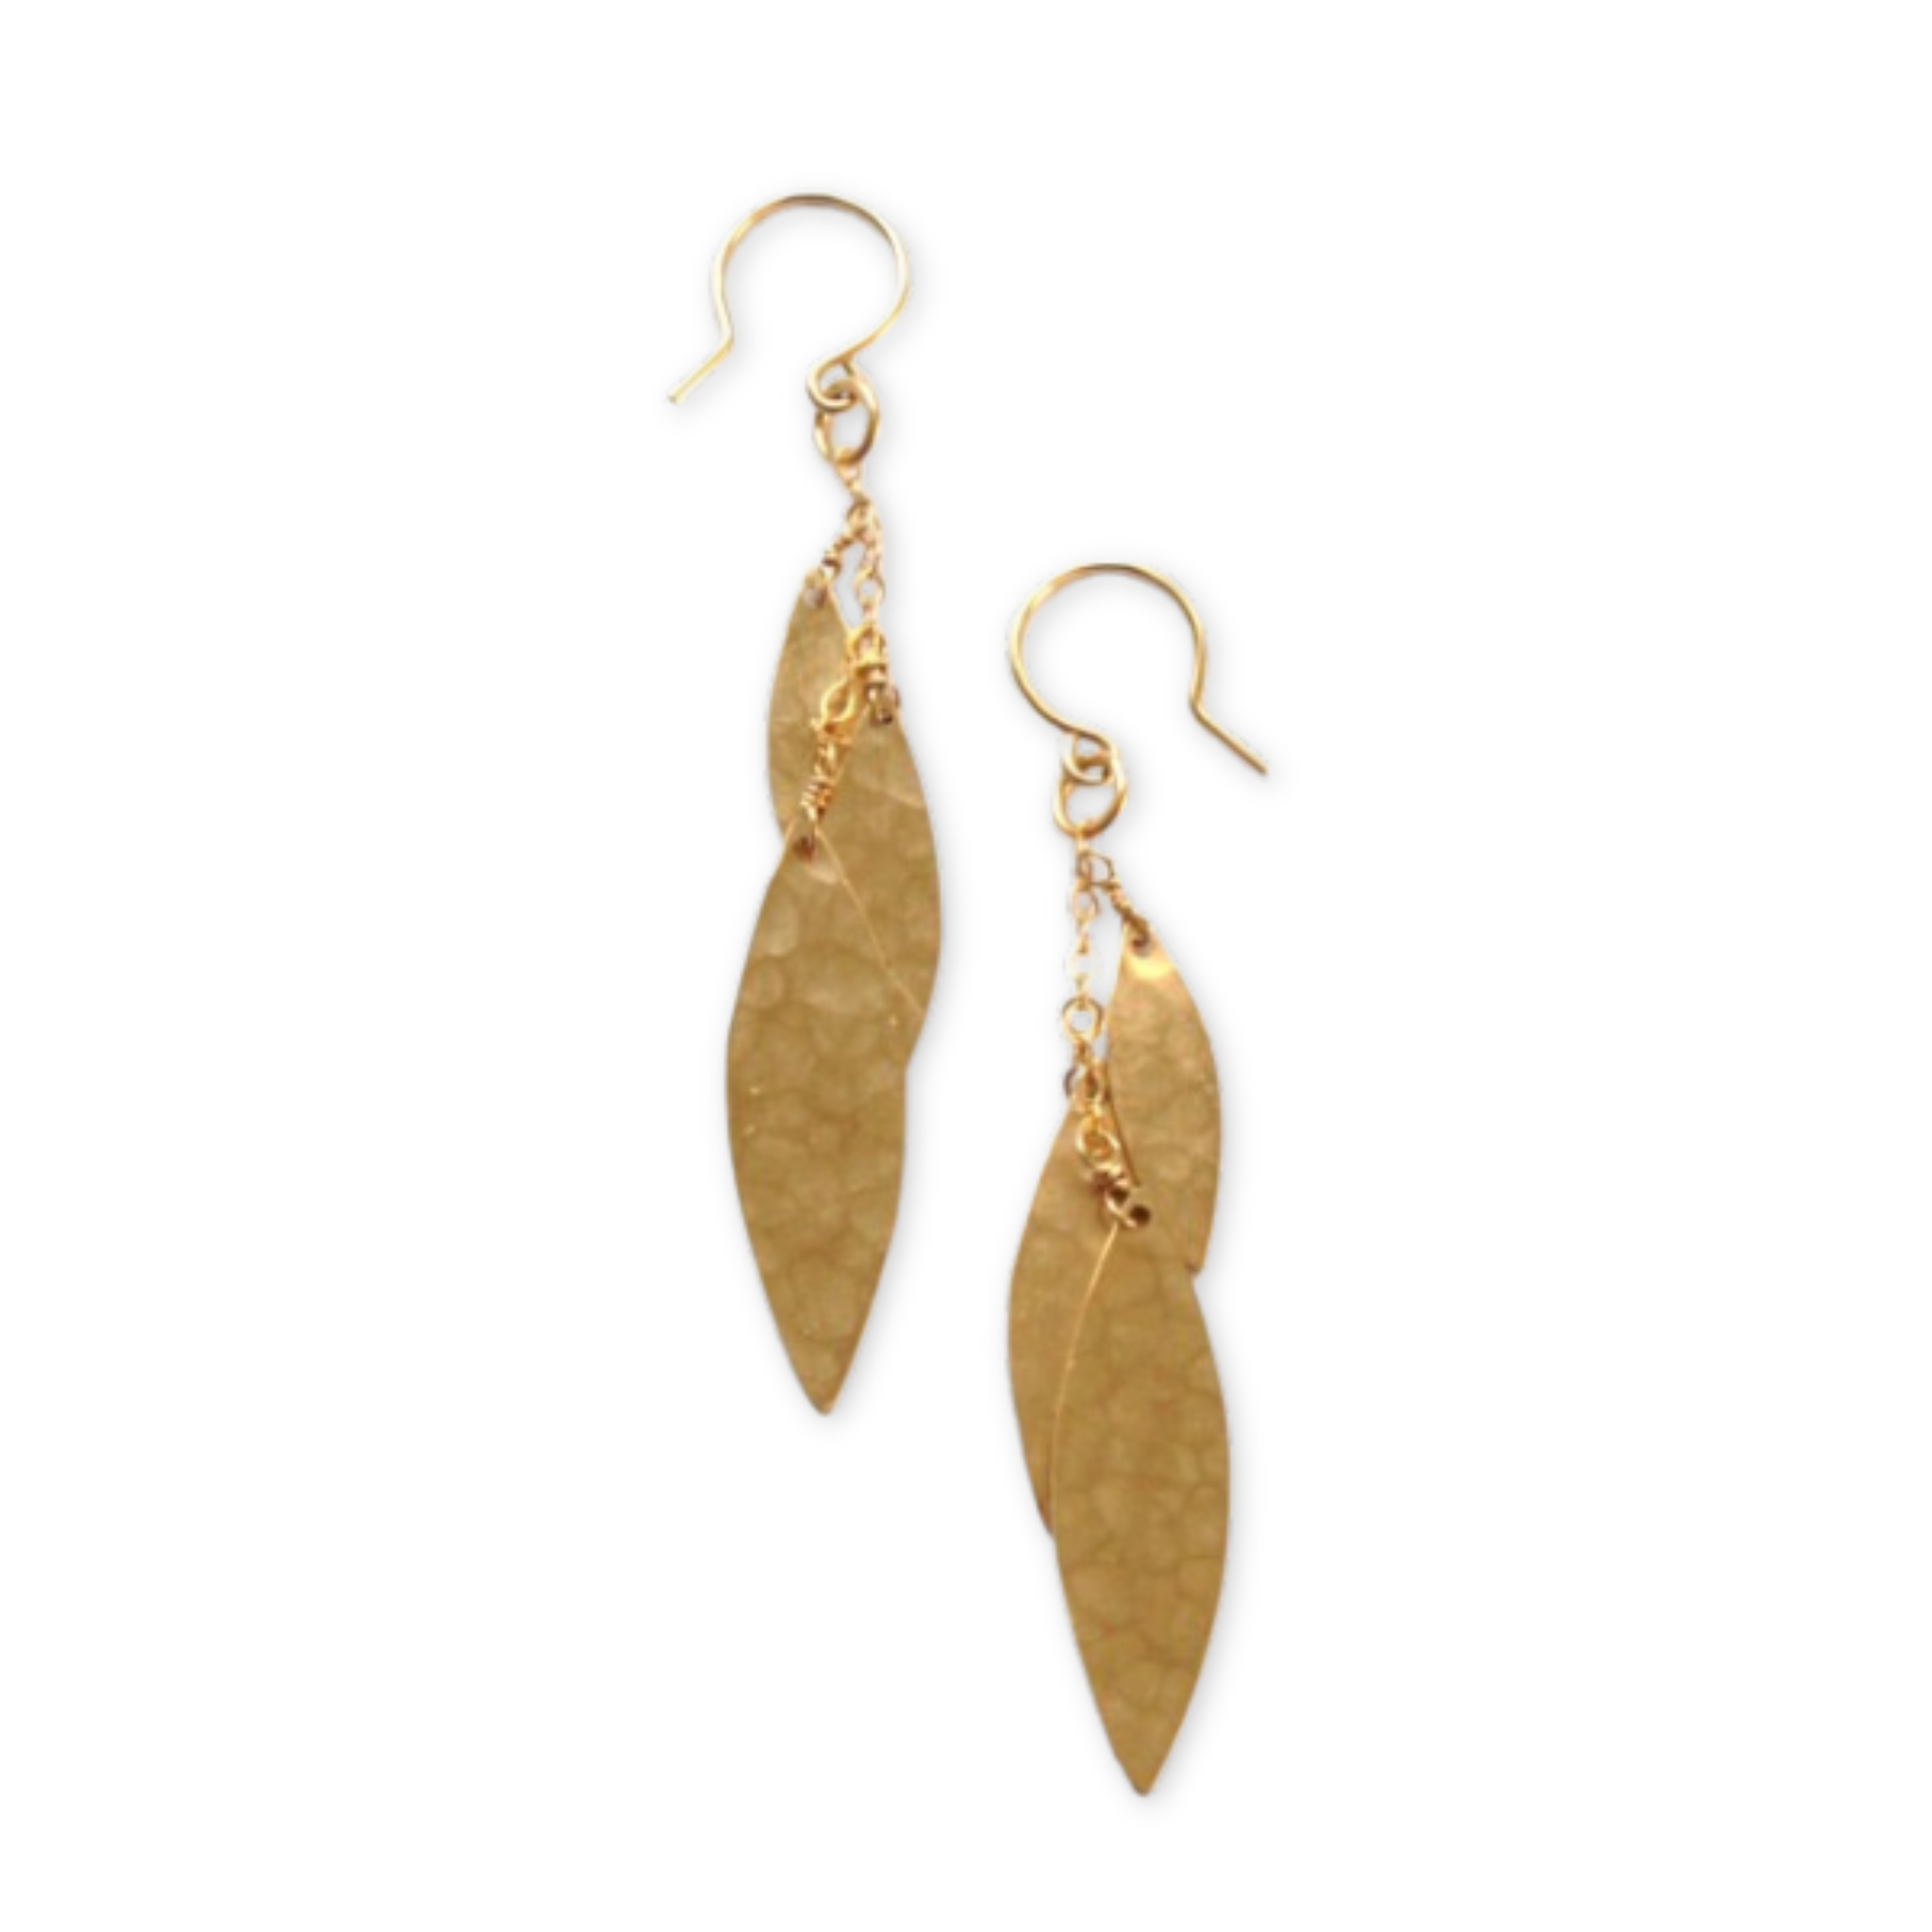 earrings with a cluster of three hammered leaf shaped pendants  hanging on small chains